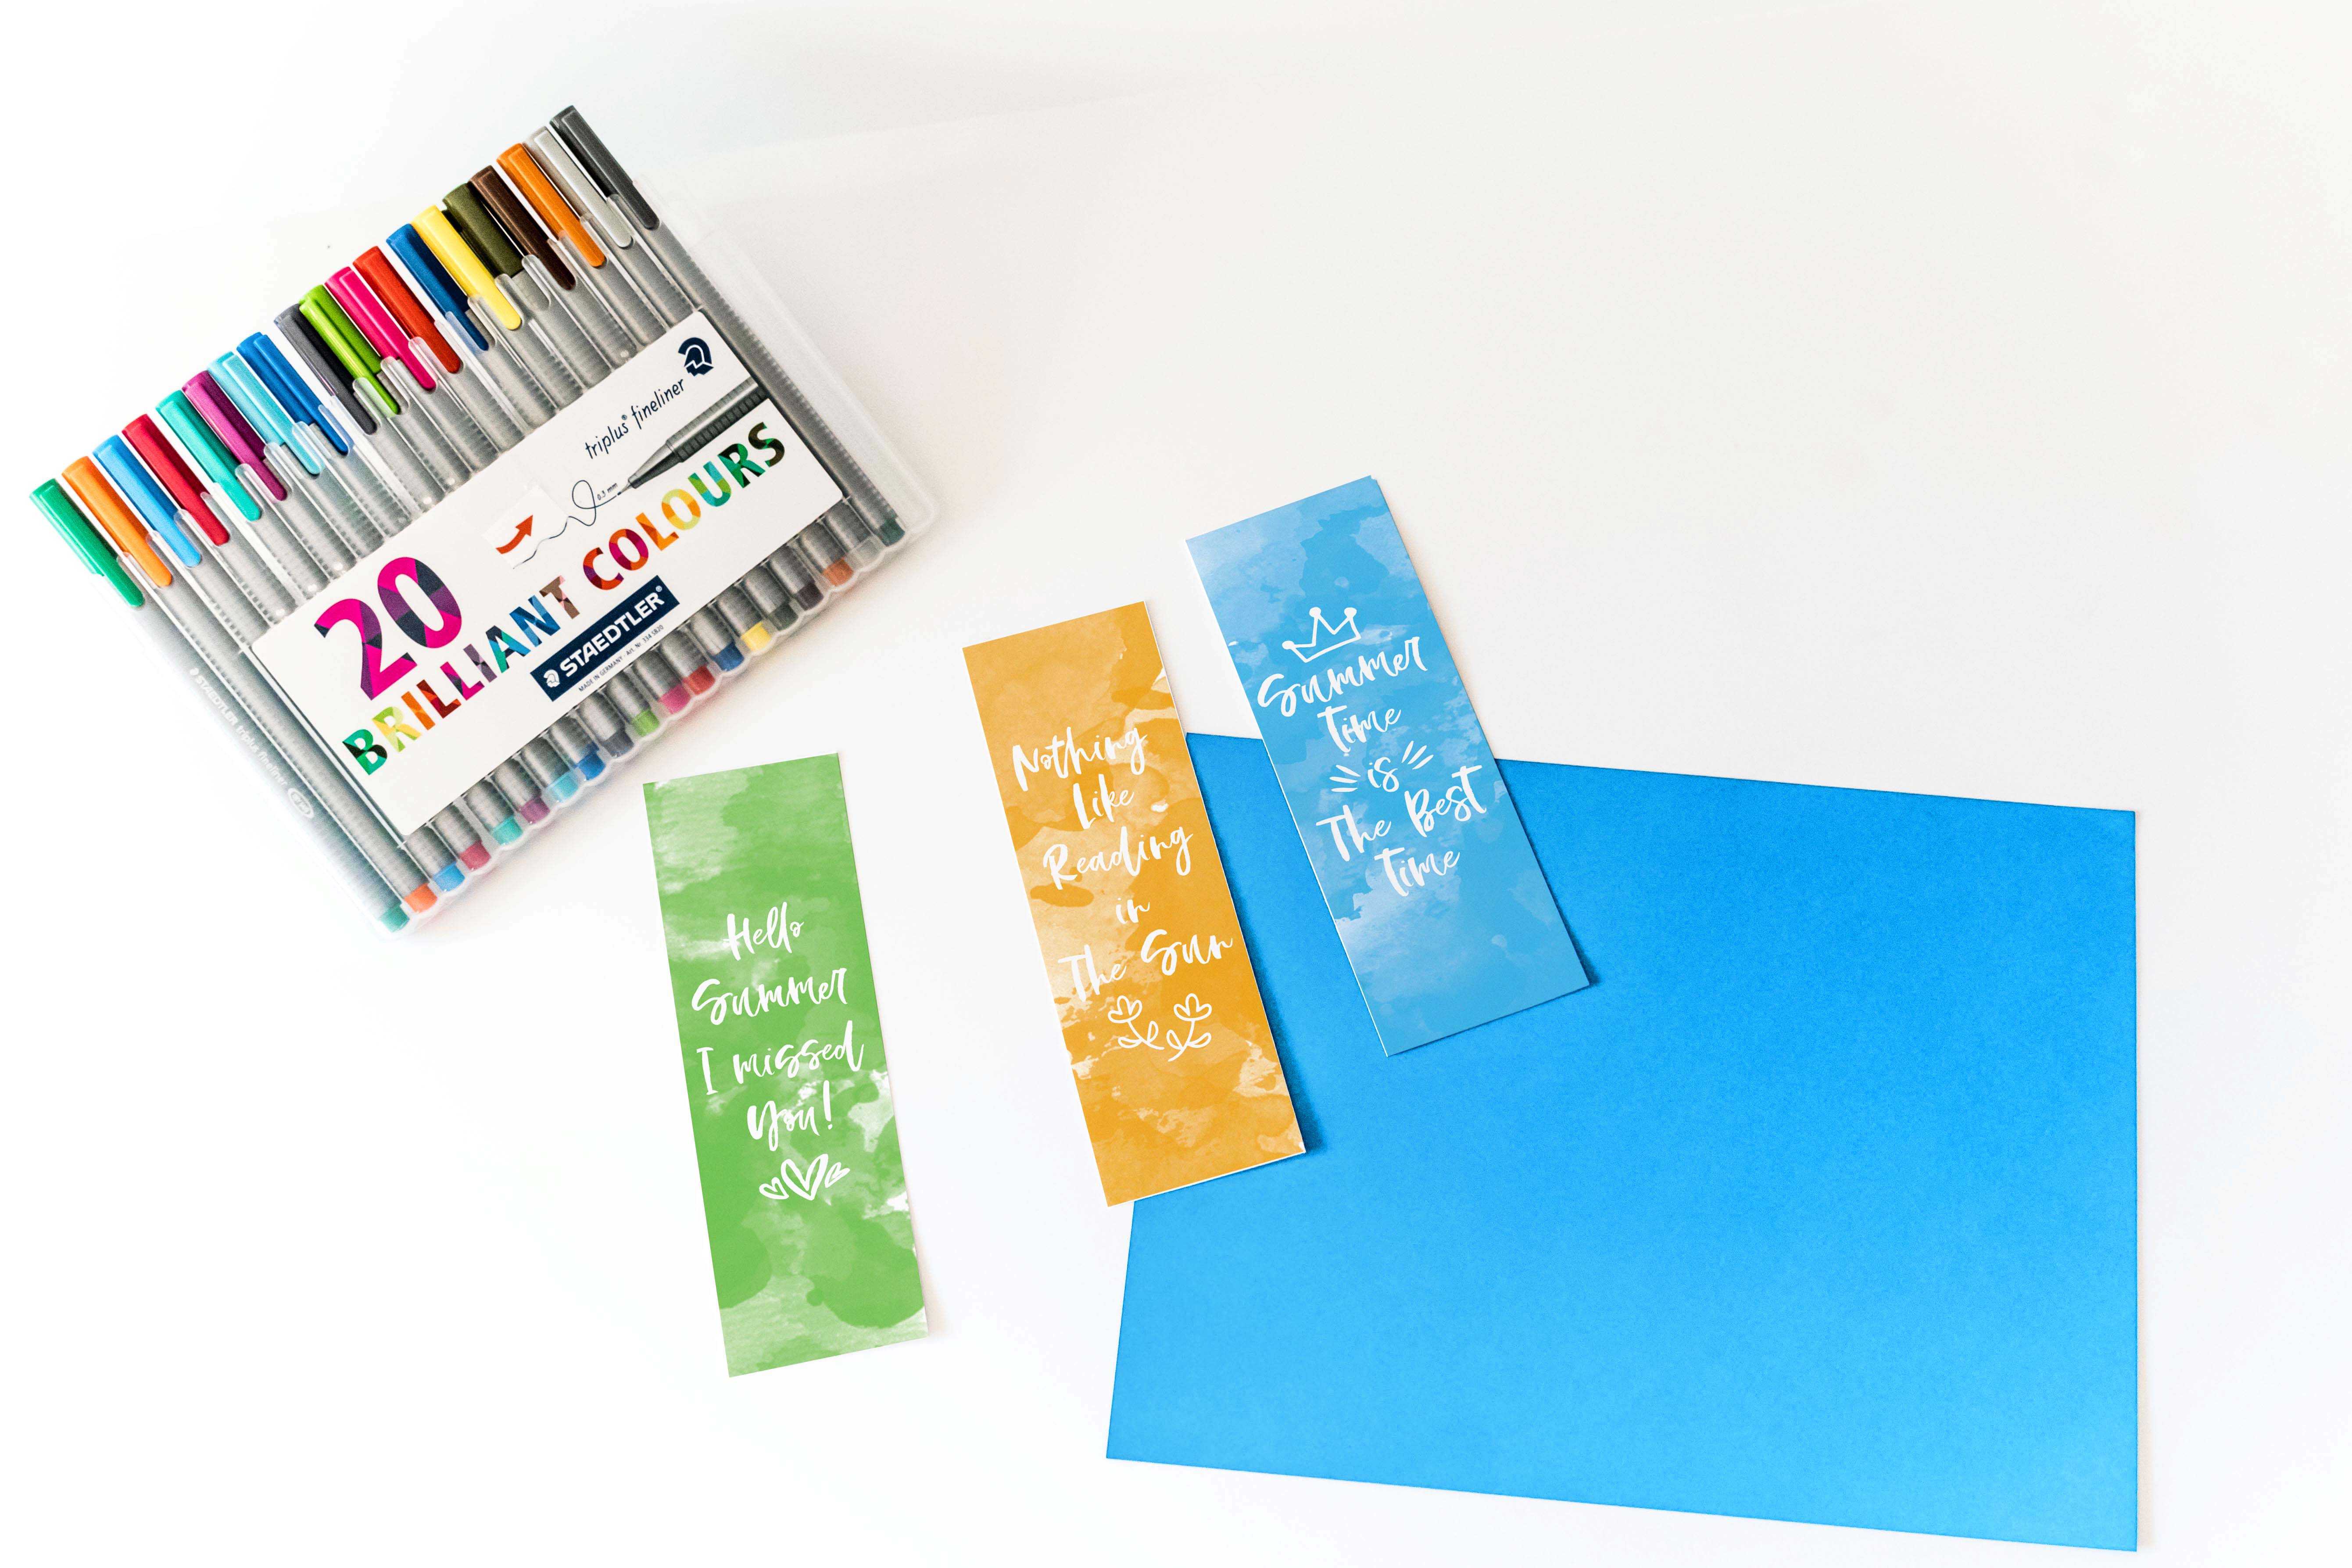 Get your books ready for summer with these adorable Free Watercolor Summer Bookmarks! After all, there's nothing better than reading a book under the sun!